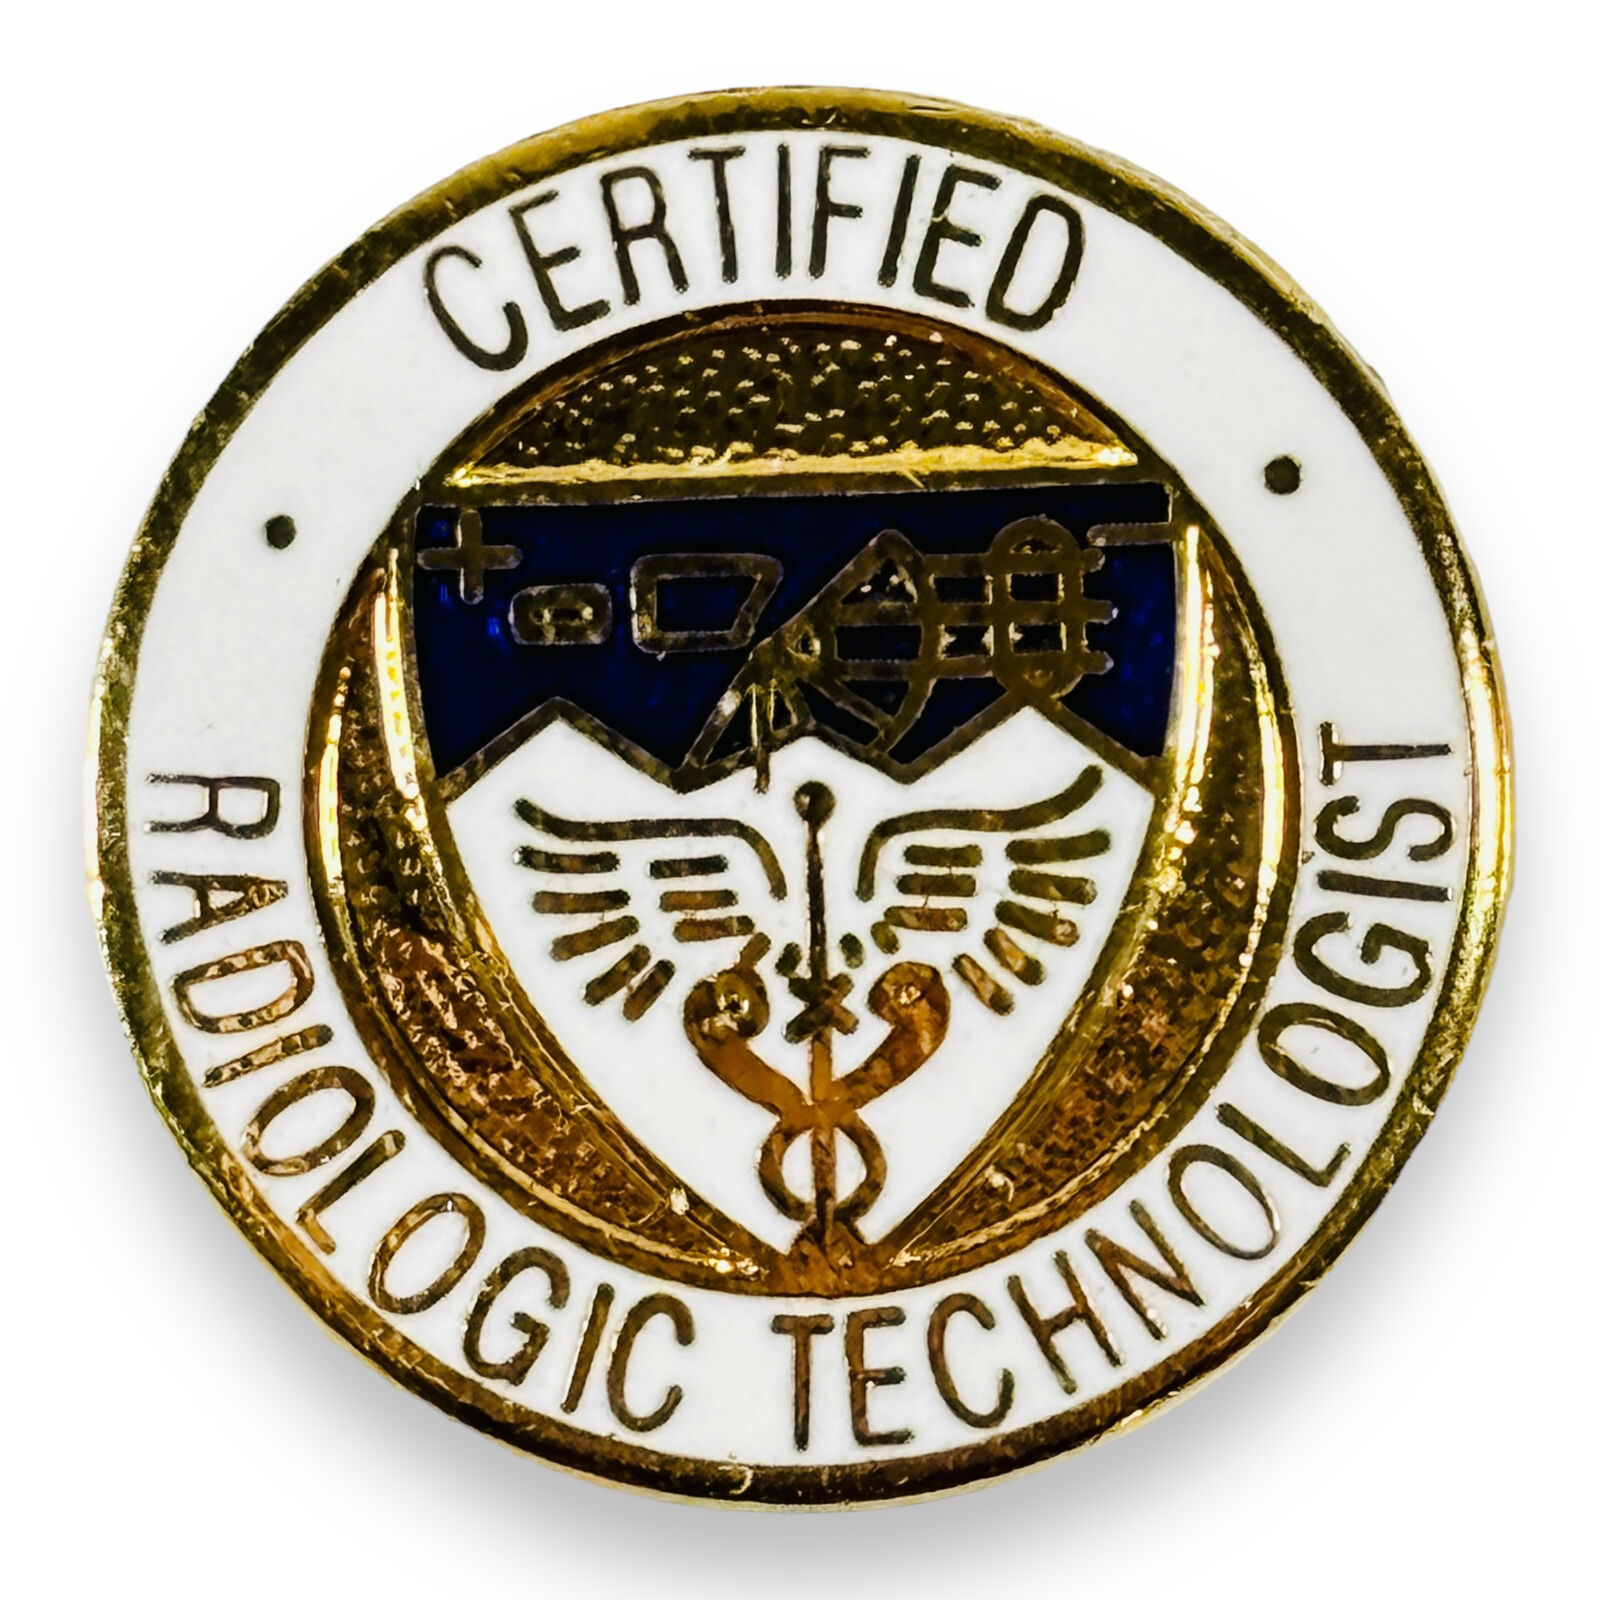 1977 Certified Radiologic Technologist Enamel and Gold-Tone Medical Caduceus Pin